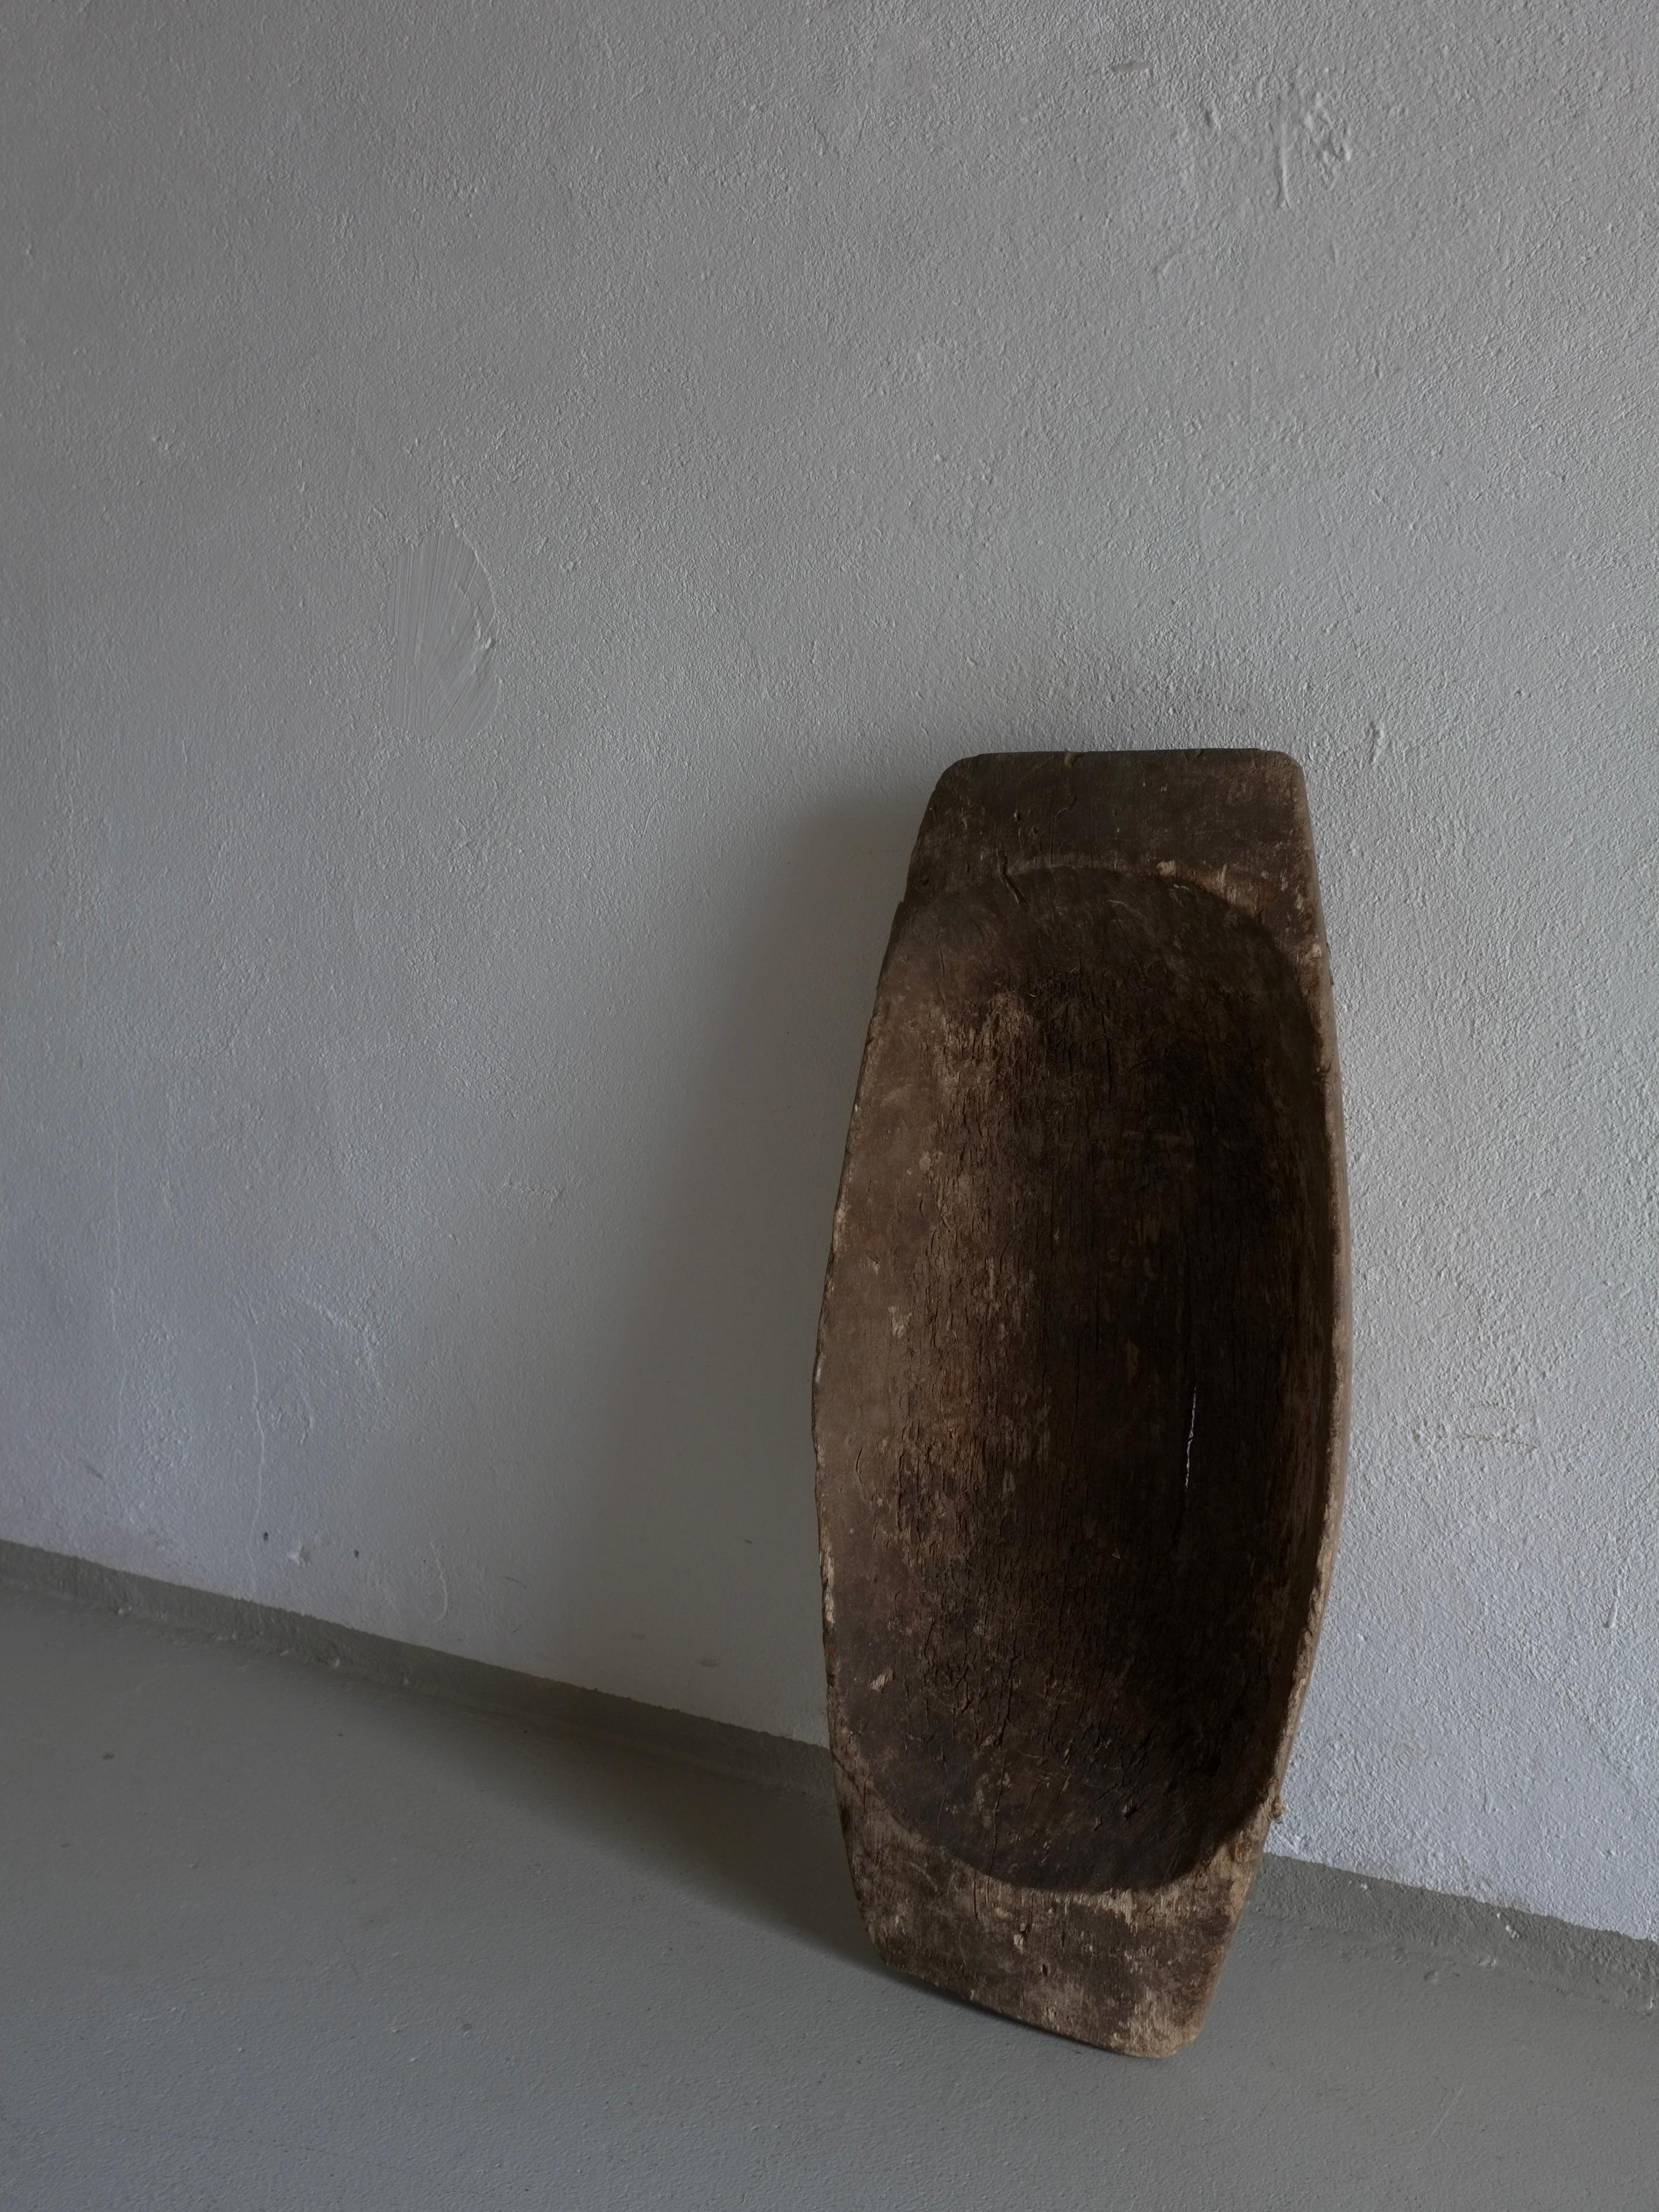 Antique primitive carved wooden bowl (#3) with a beautiful patina. Distressed wood, please check the photos.

Additional information:
Origin: Latvia
Dimensions: W 68 cm x D 31.5 cm x H 9 cm